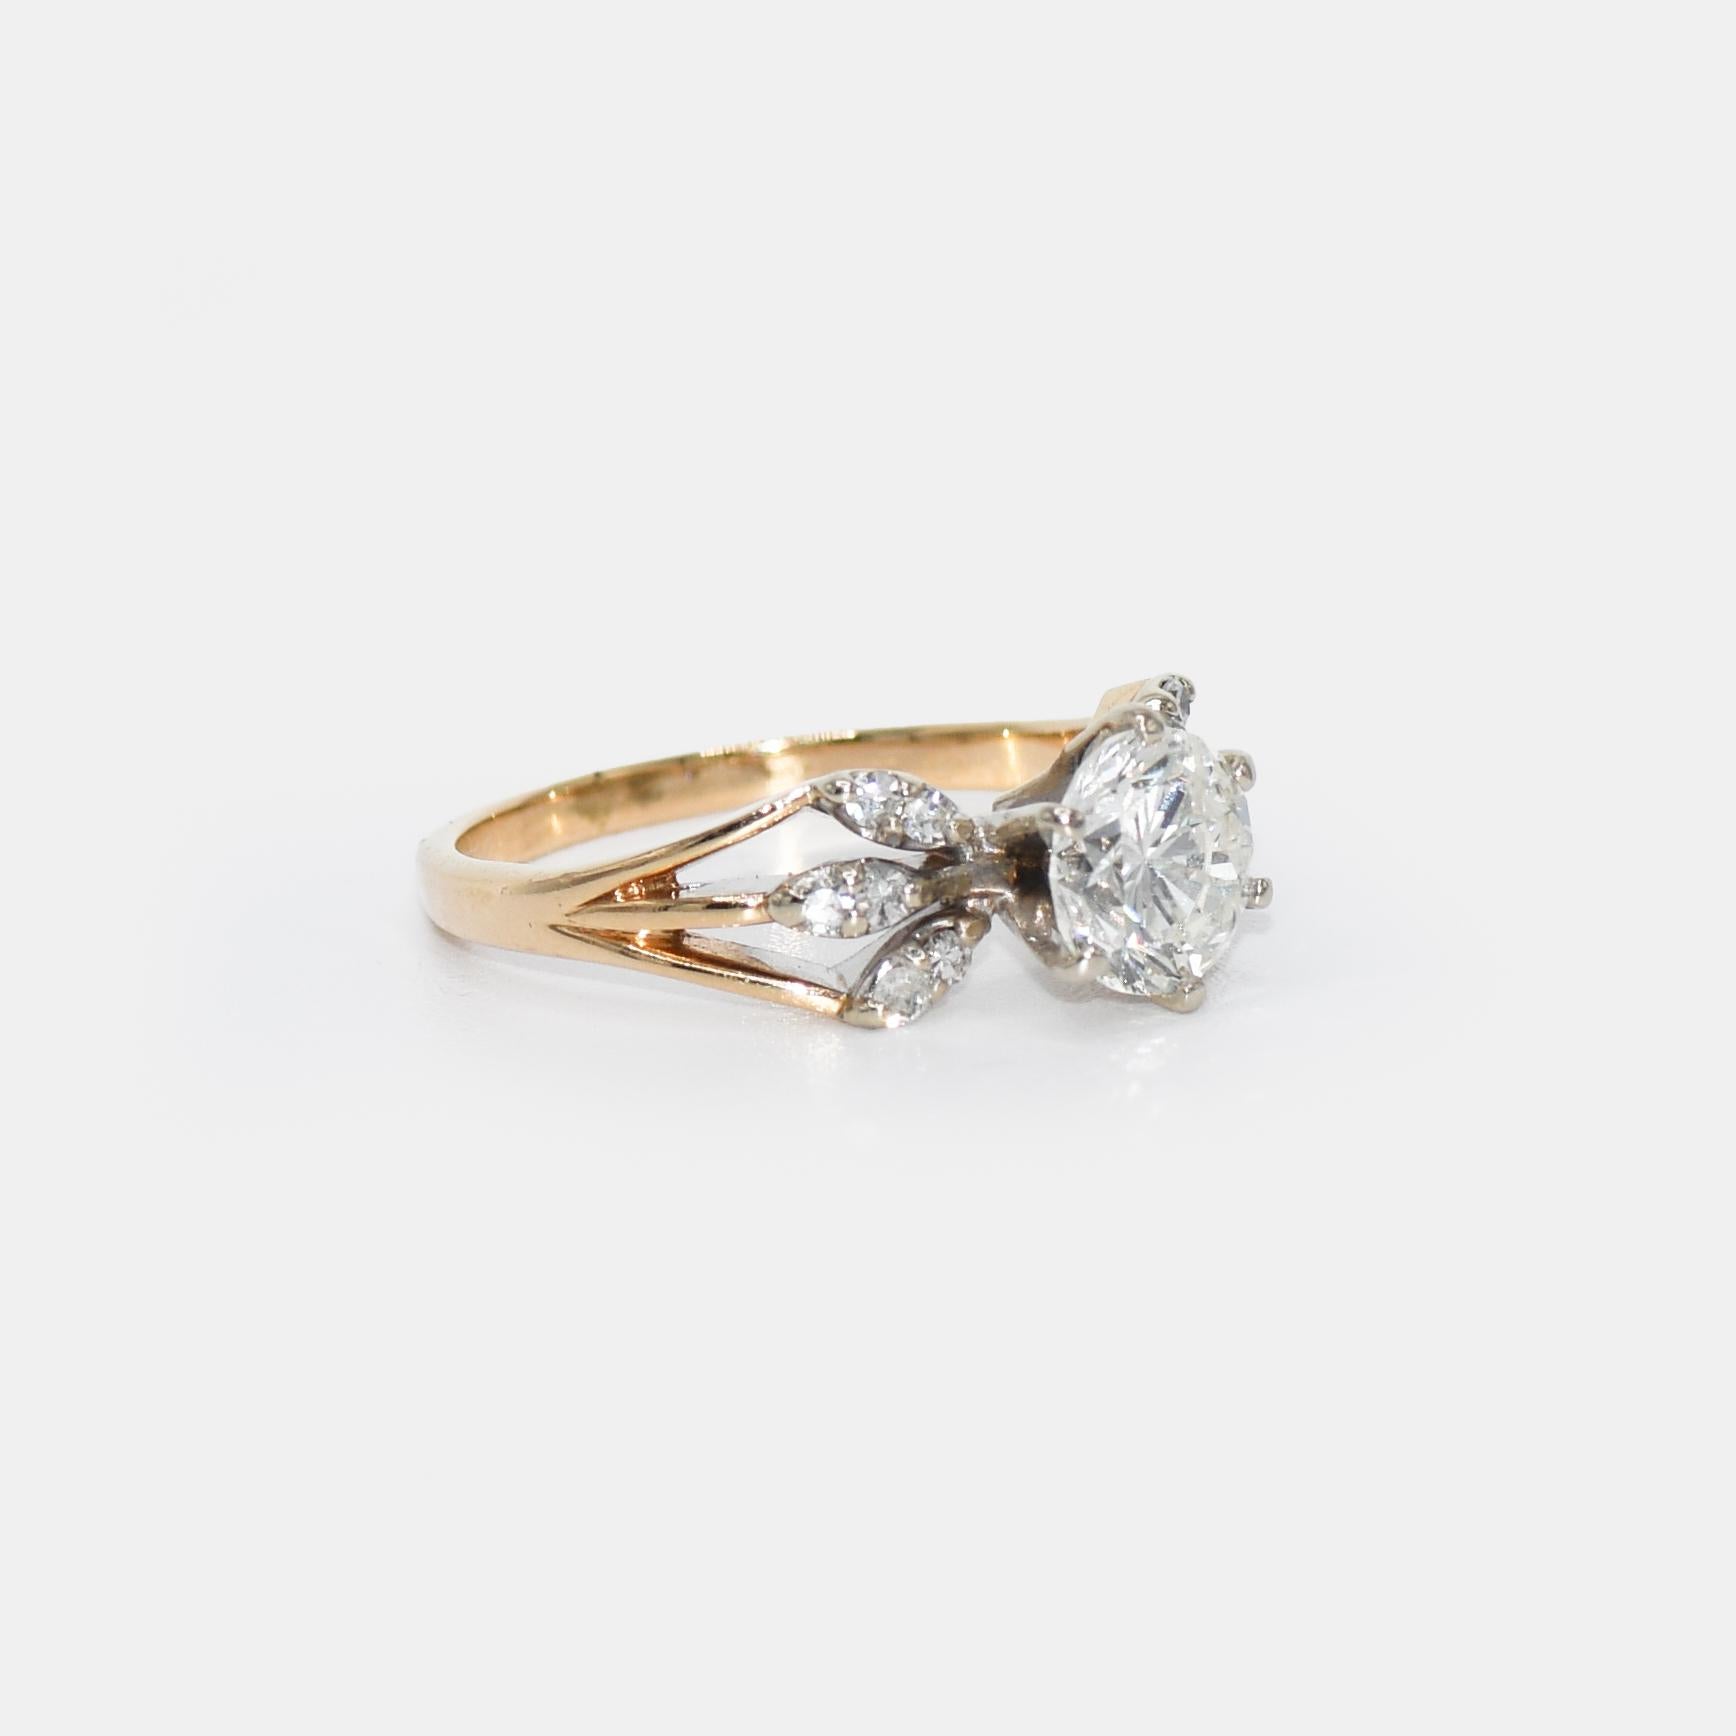 14k Yellow Gold Diamond Ring, 1.25ct Round Brilliant
14k yellow gold diamond ring.
The center stone is an 1.25ct round brilliant cut. Color is I-J, Clarity I1.
There is .10tdw in smaller single cut diamonds. 
weighs 3.7g
size 7 1/2